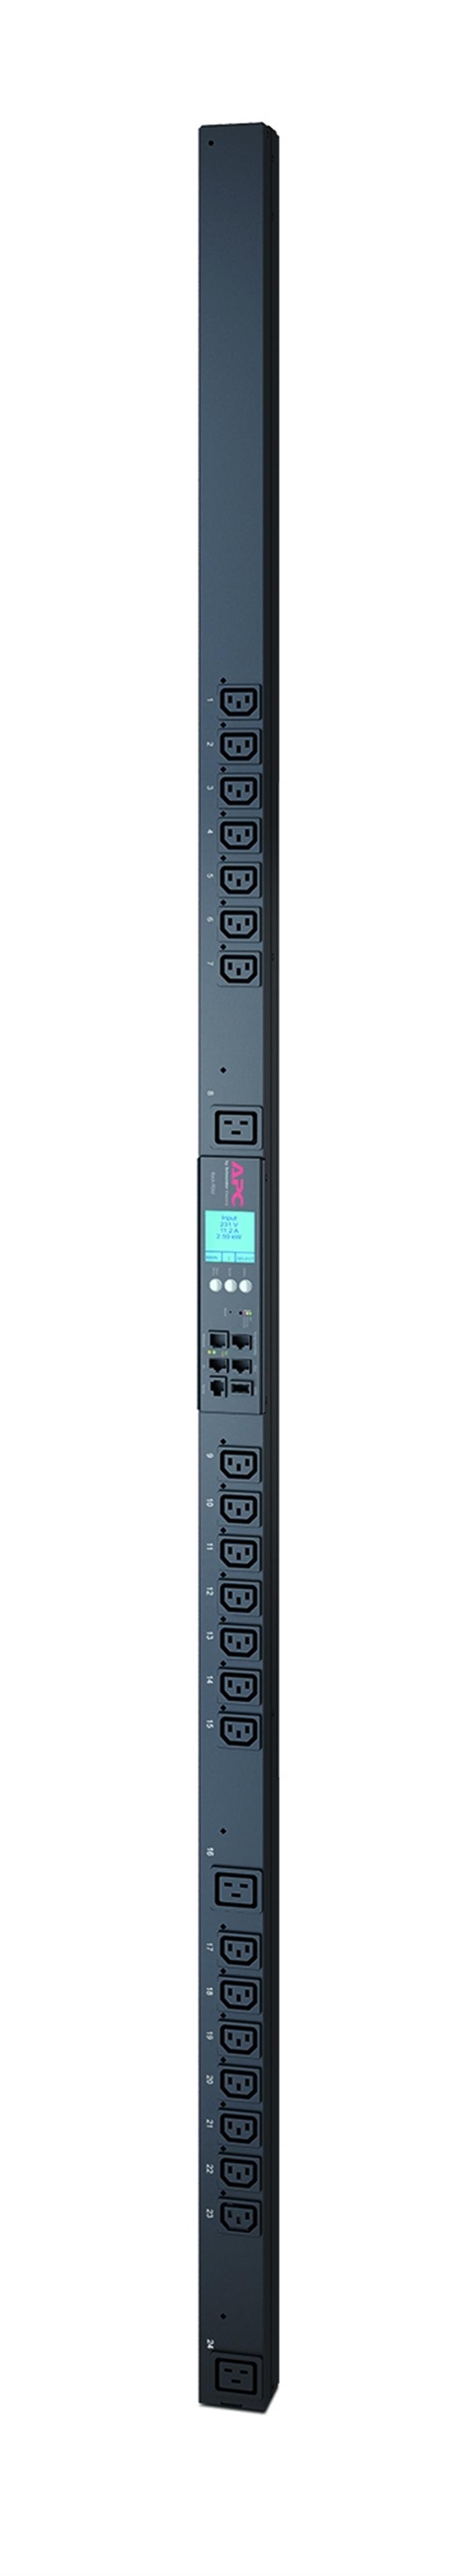 APC Rack PDU, Metered-by-Outlet with Switching, ZeroU, 16A, 230V, (21x) C13 & (3x) C19